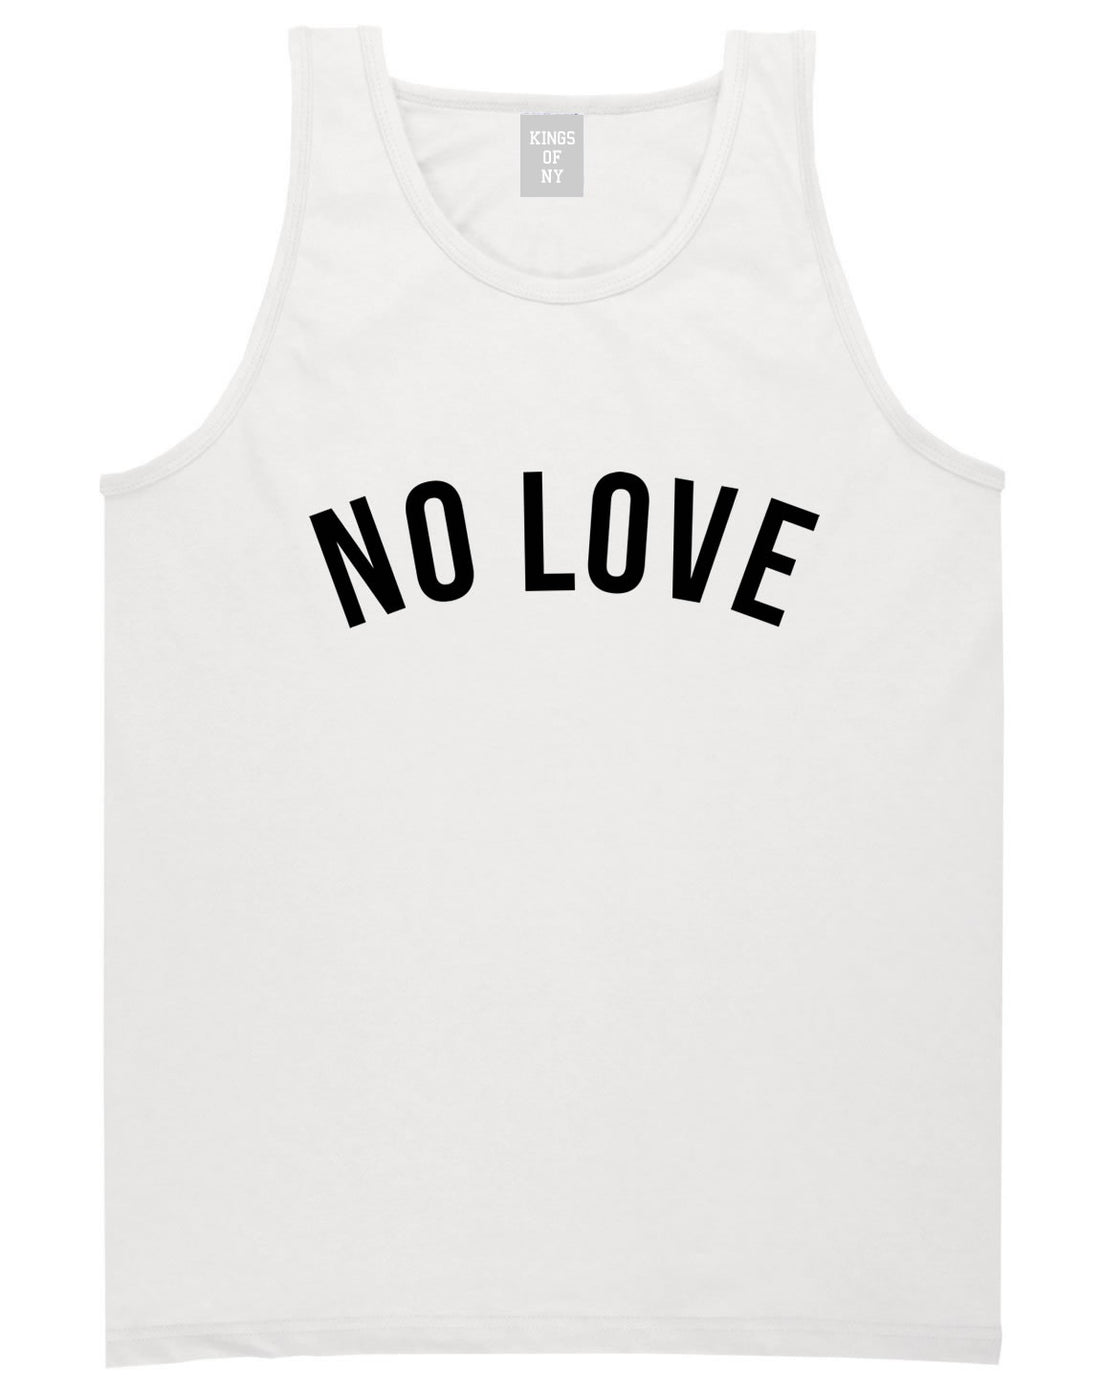 No Love Tank Top in White by Kings Of NY